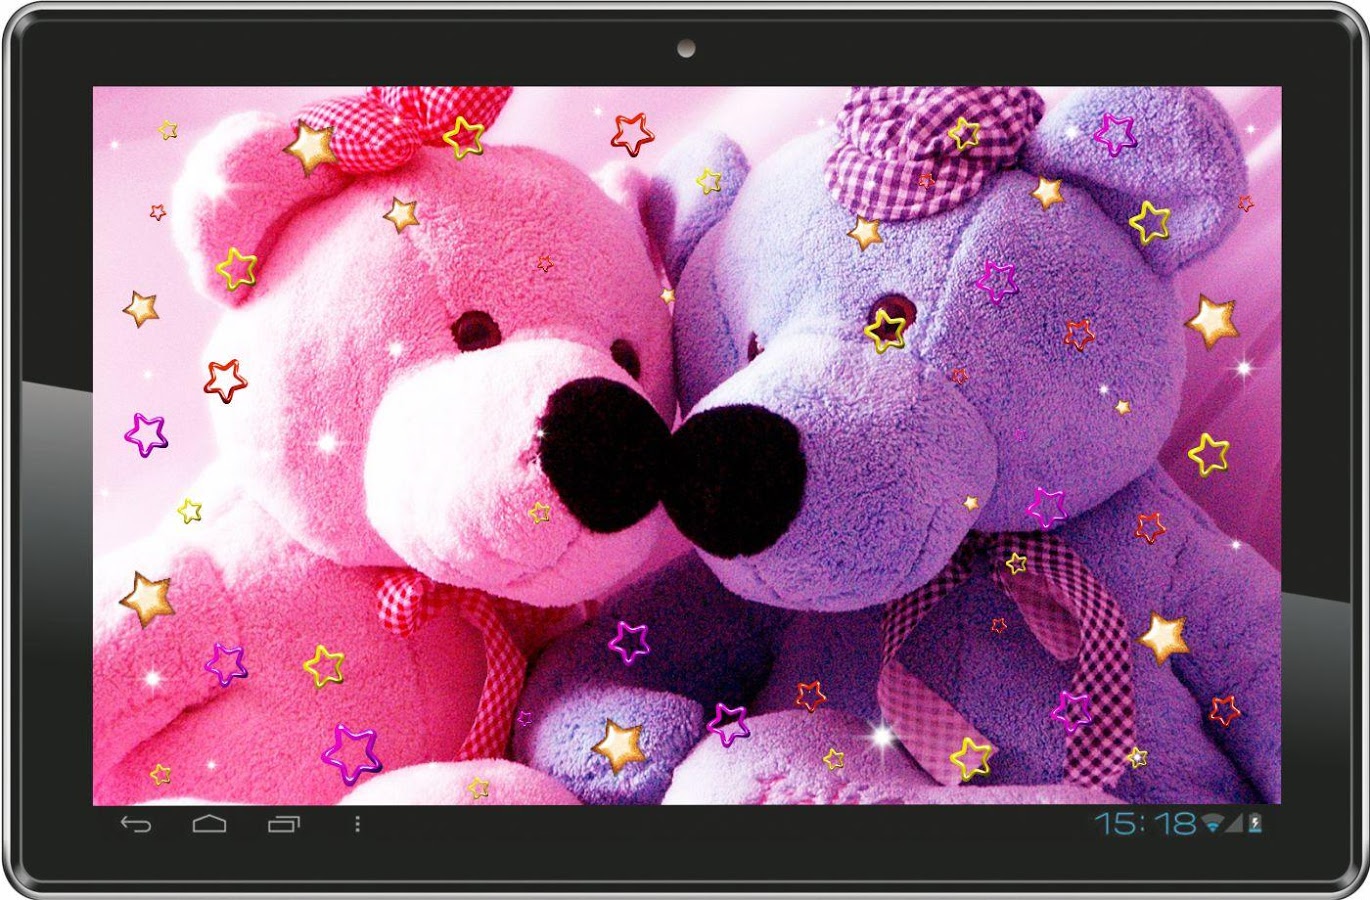 Teddy Bear Best Live Wallpaper Android Apps On Google Play